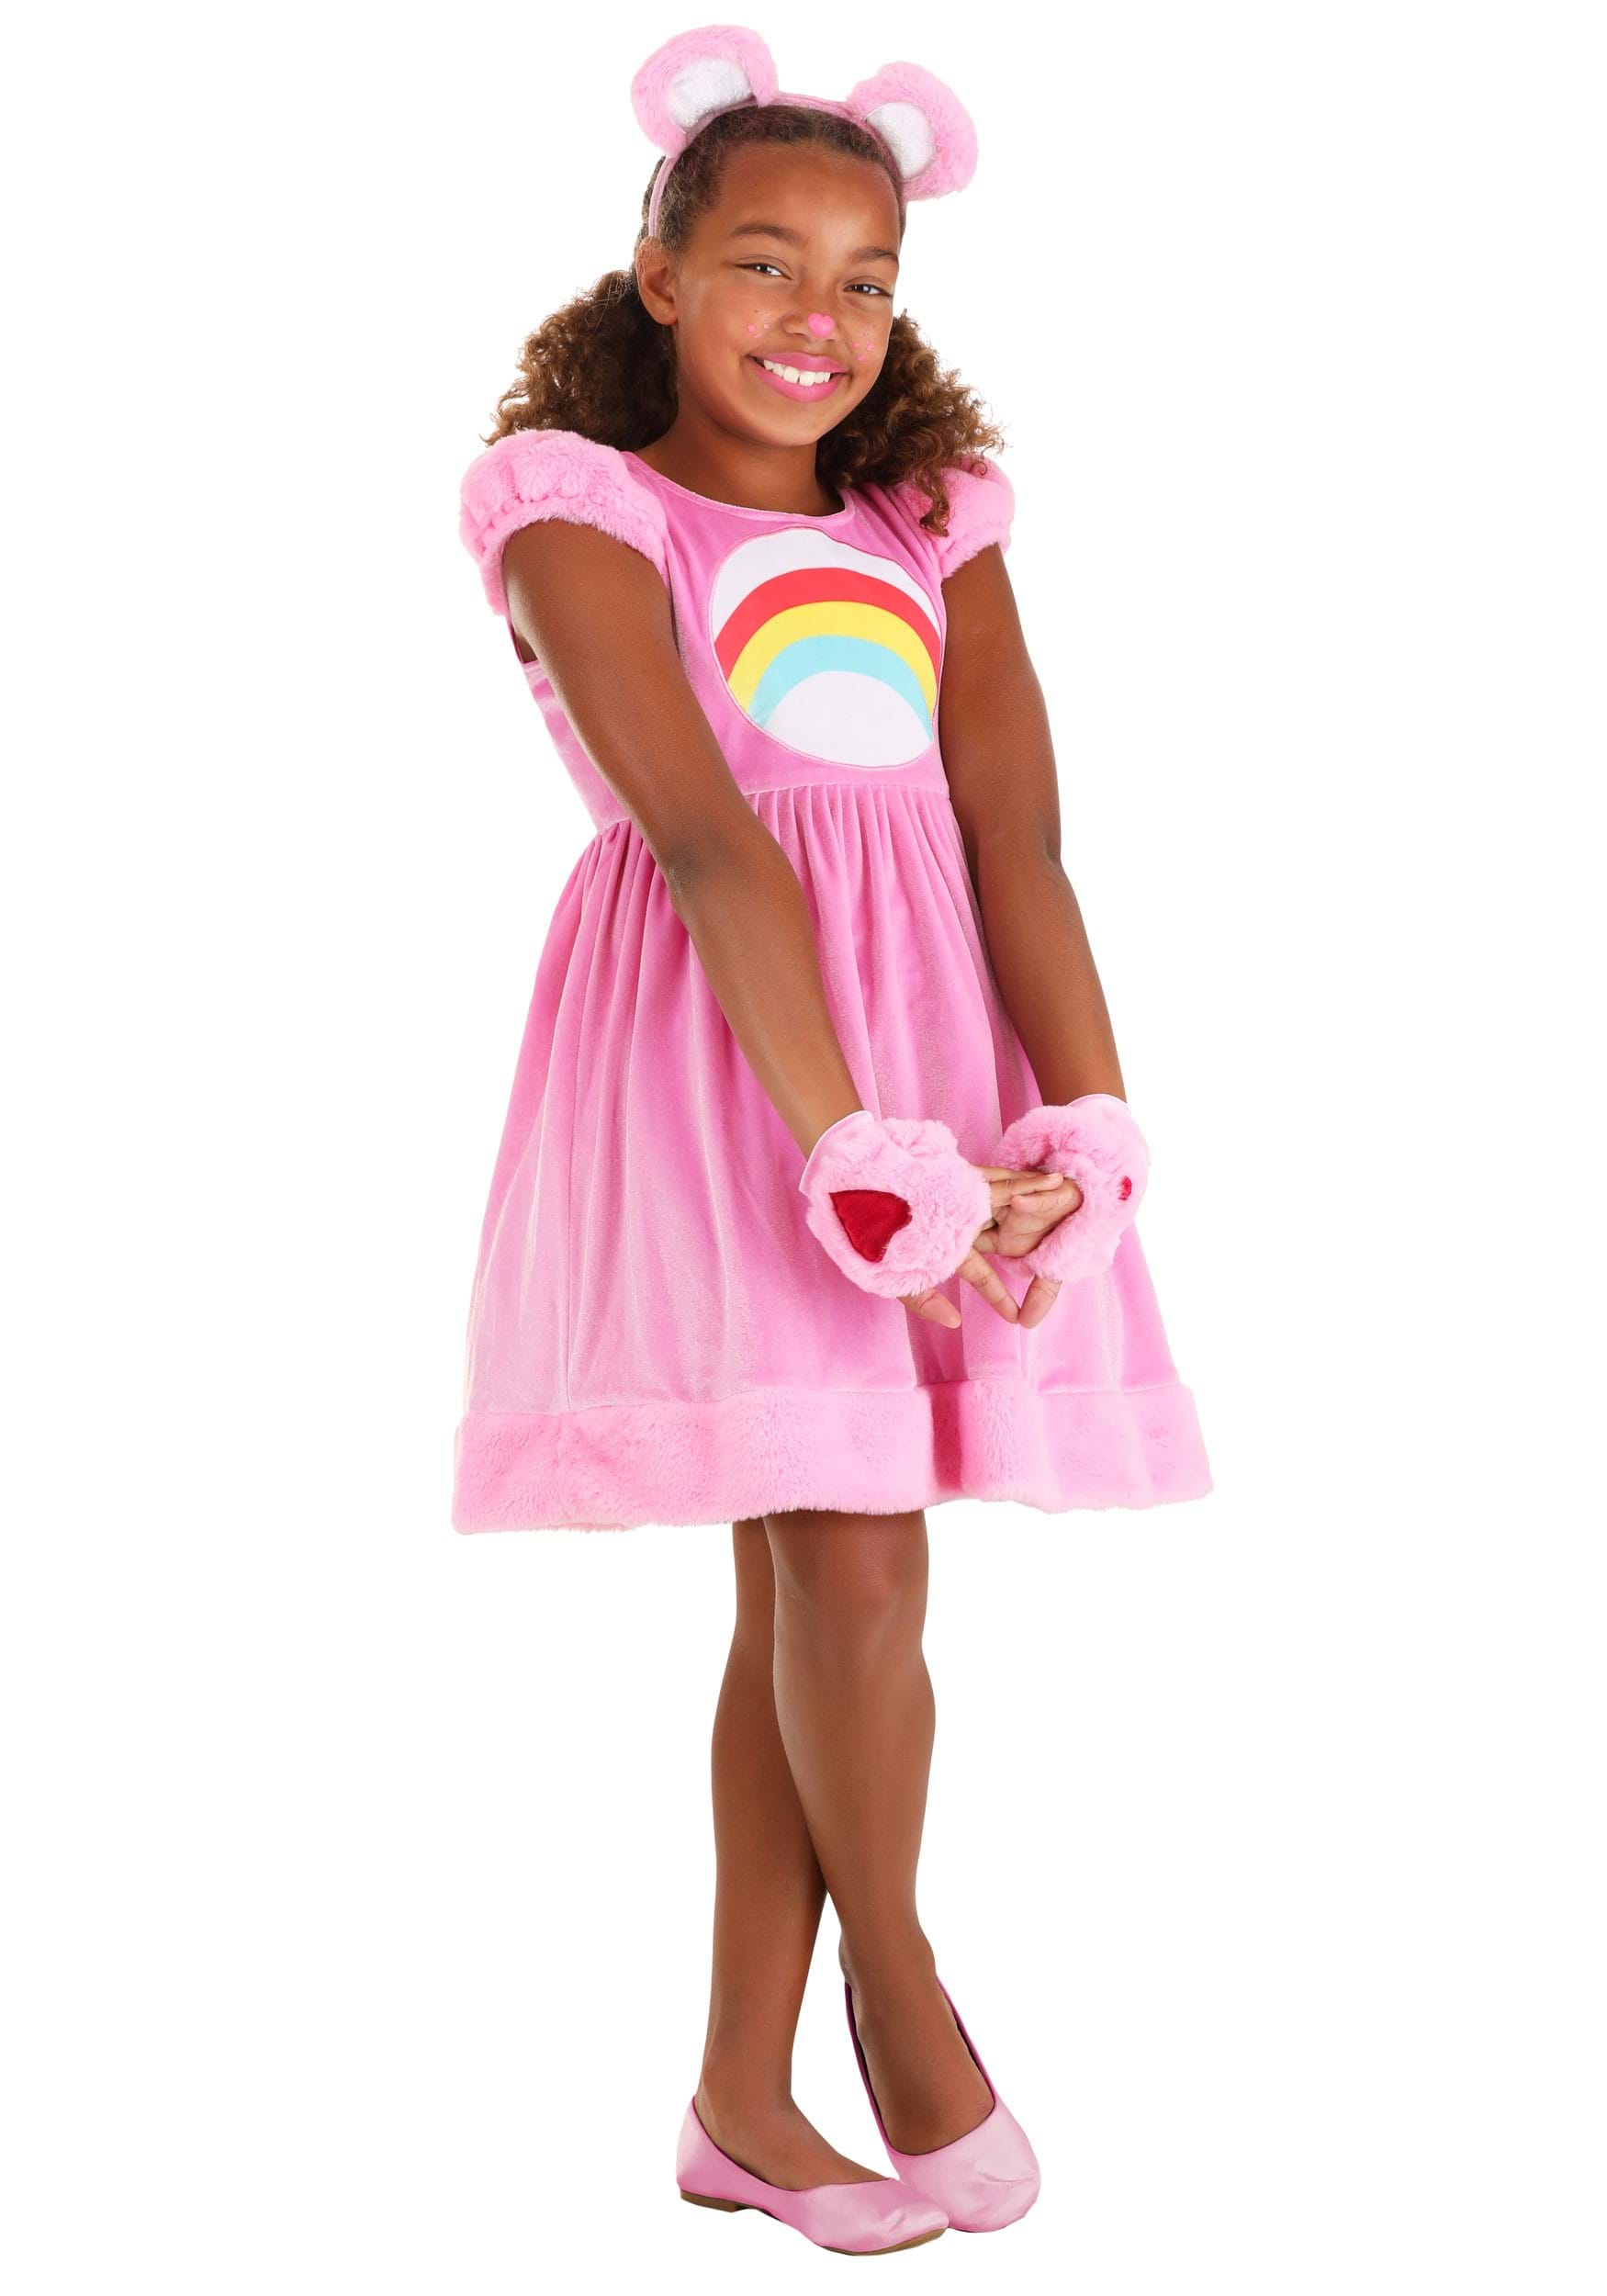 Cheer Bear Party Dress Care Bear Costume for Kids